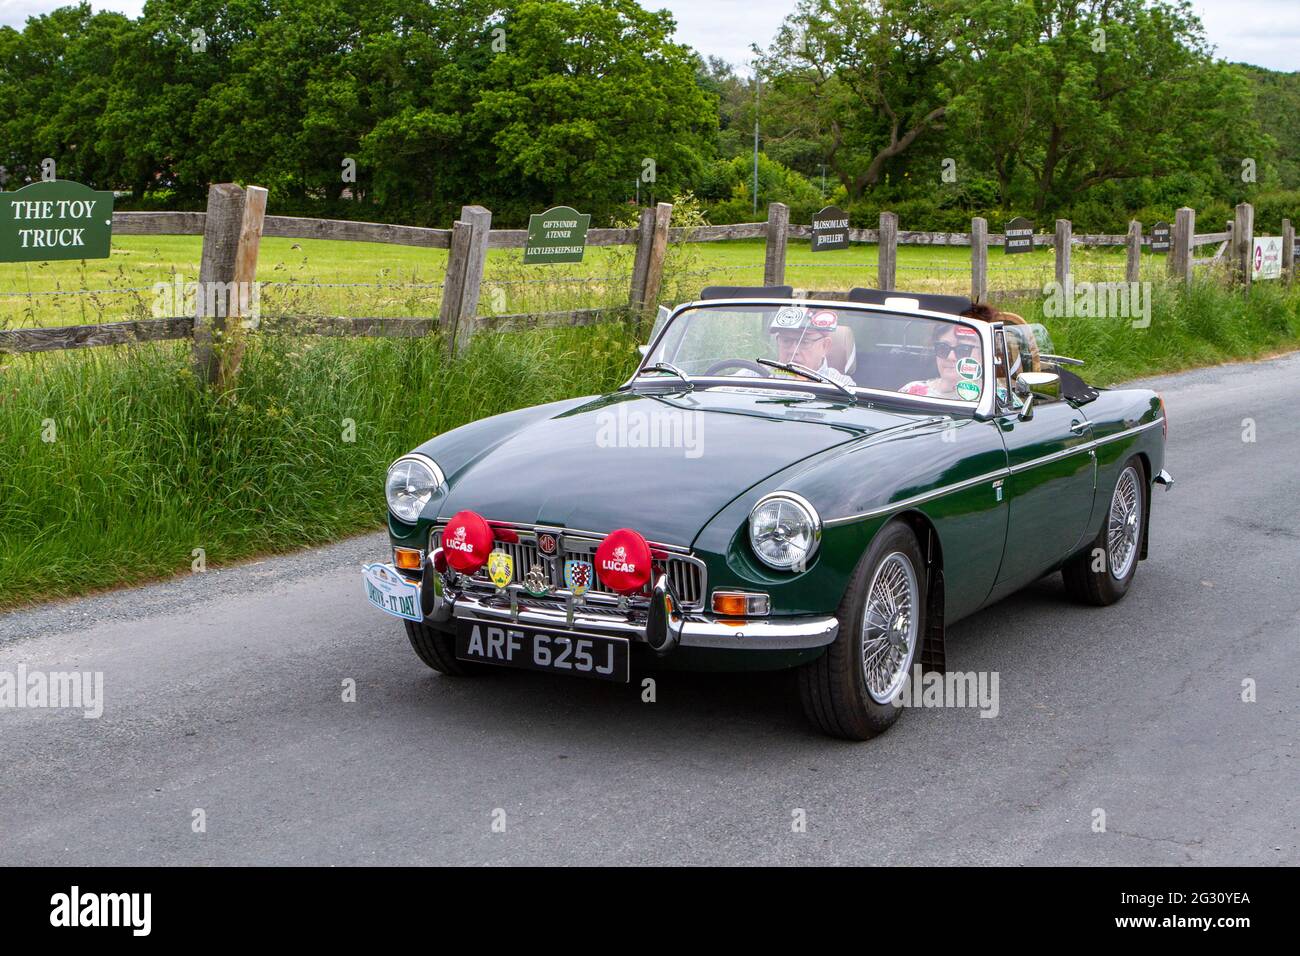 1971 70s green MG B 1798cc petrol sports car a the 58th Annual Manchester to Blackpool Vintage & Classic Car Run The event is a ‘Touring Assembly’ Stock Photo